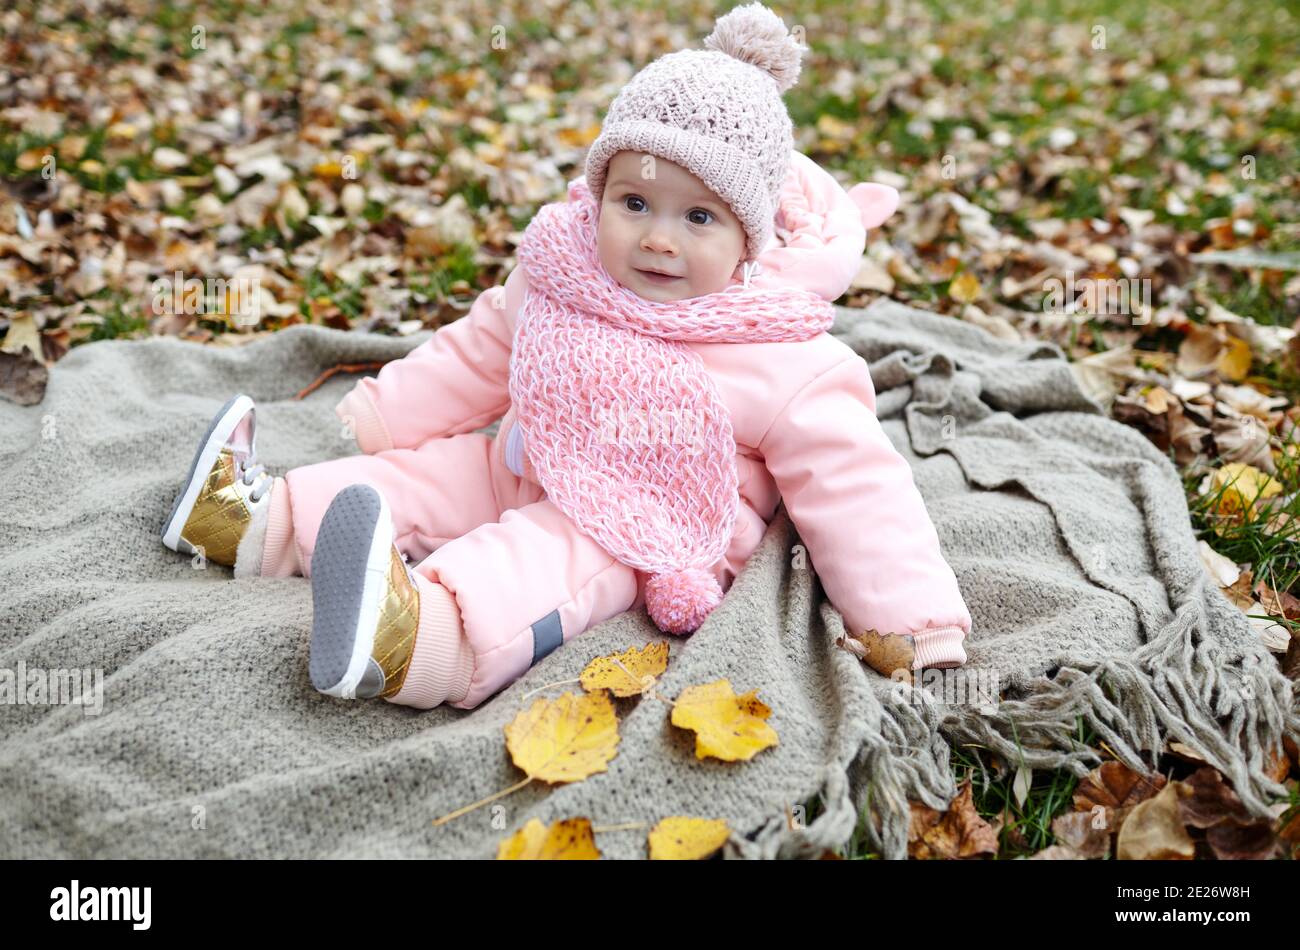 Beautiful baby girl sitting on the plaid. Child outdoor. Adorable